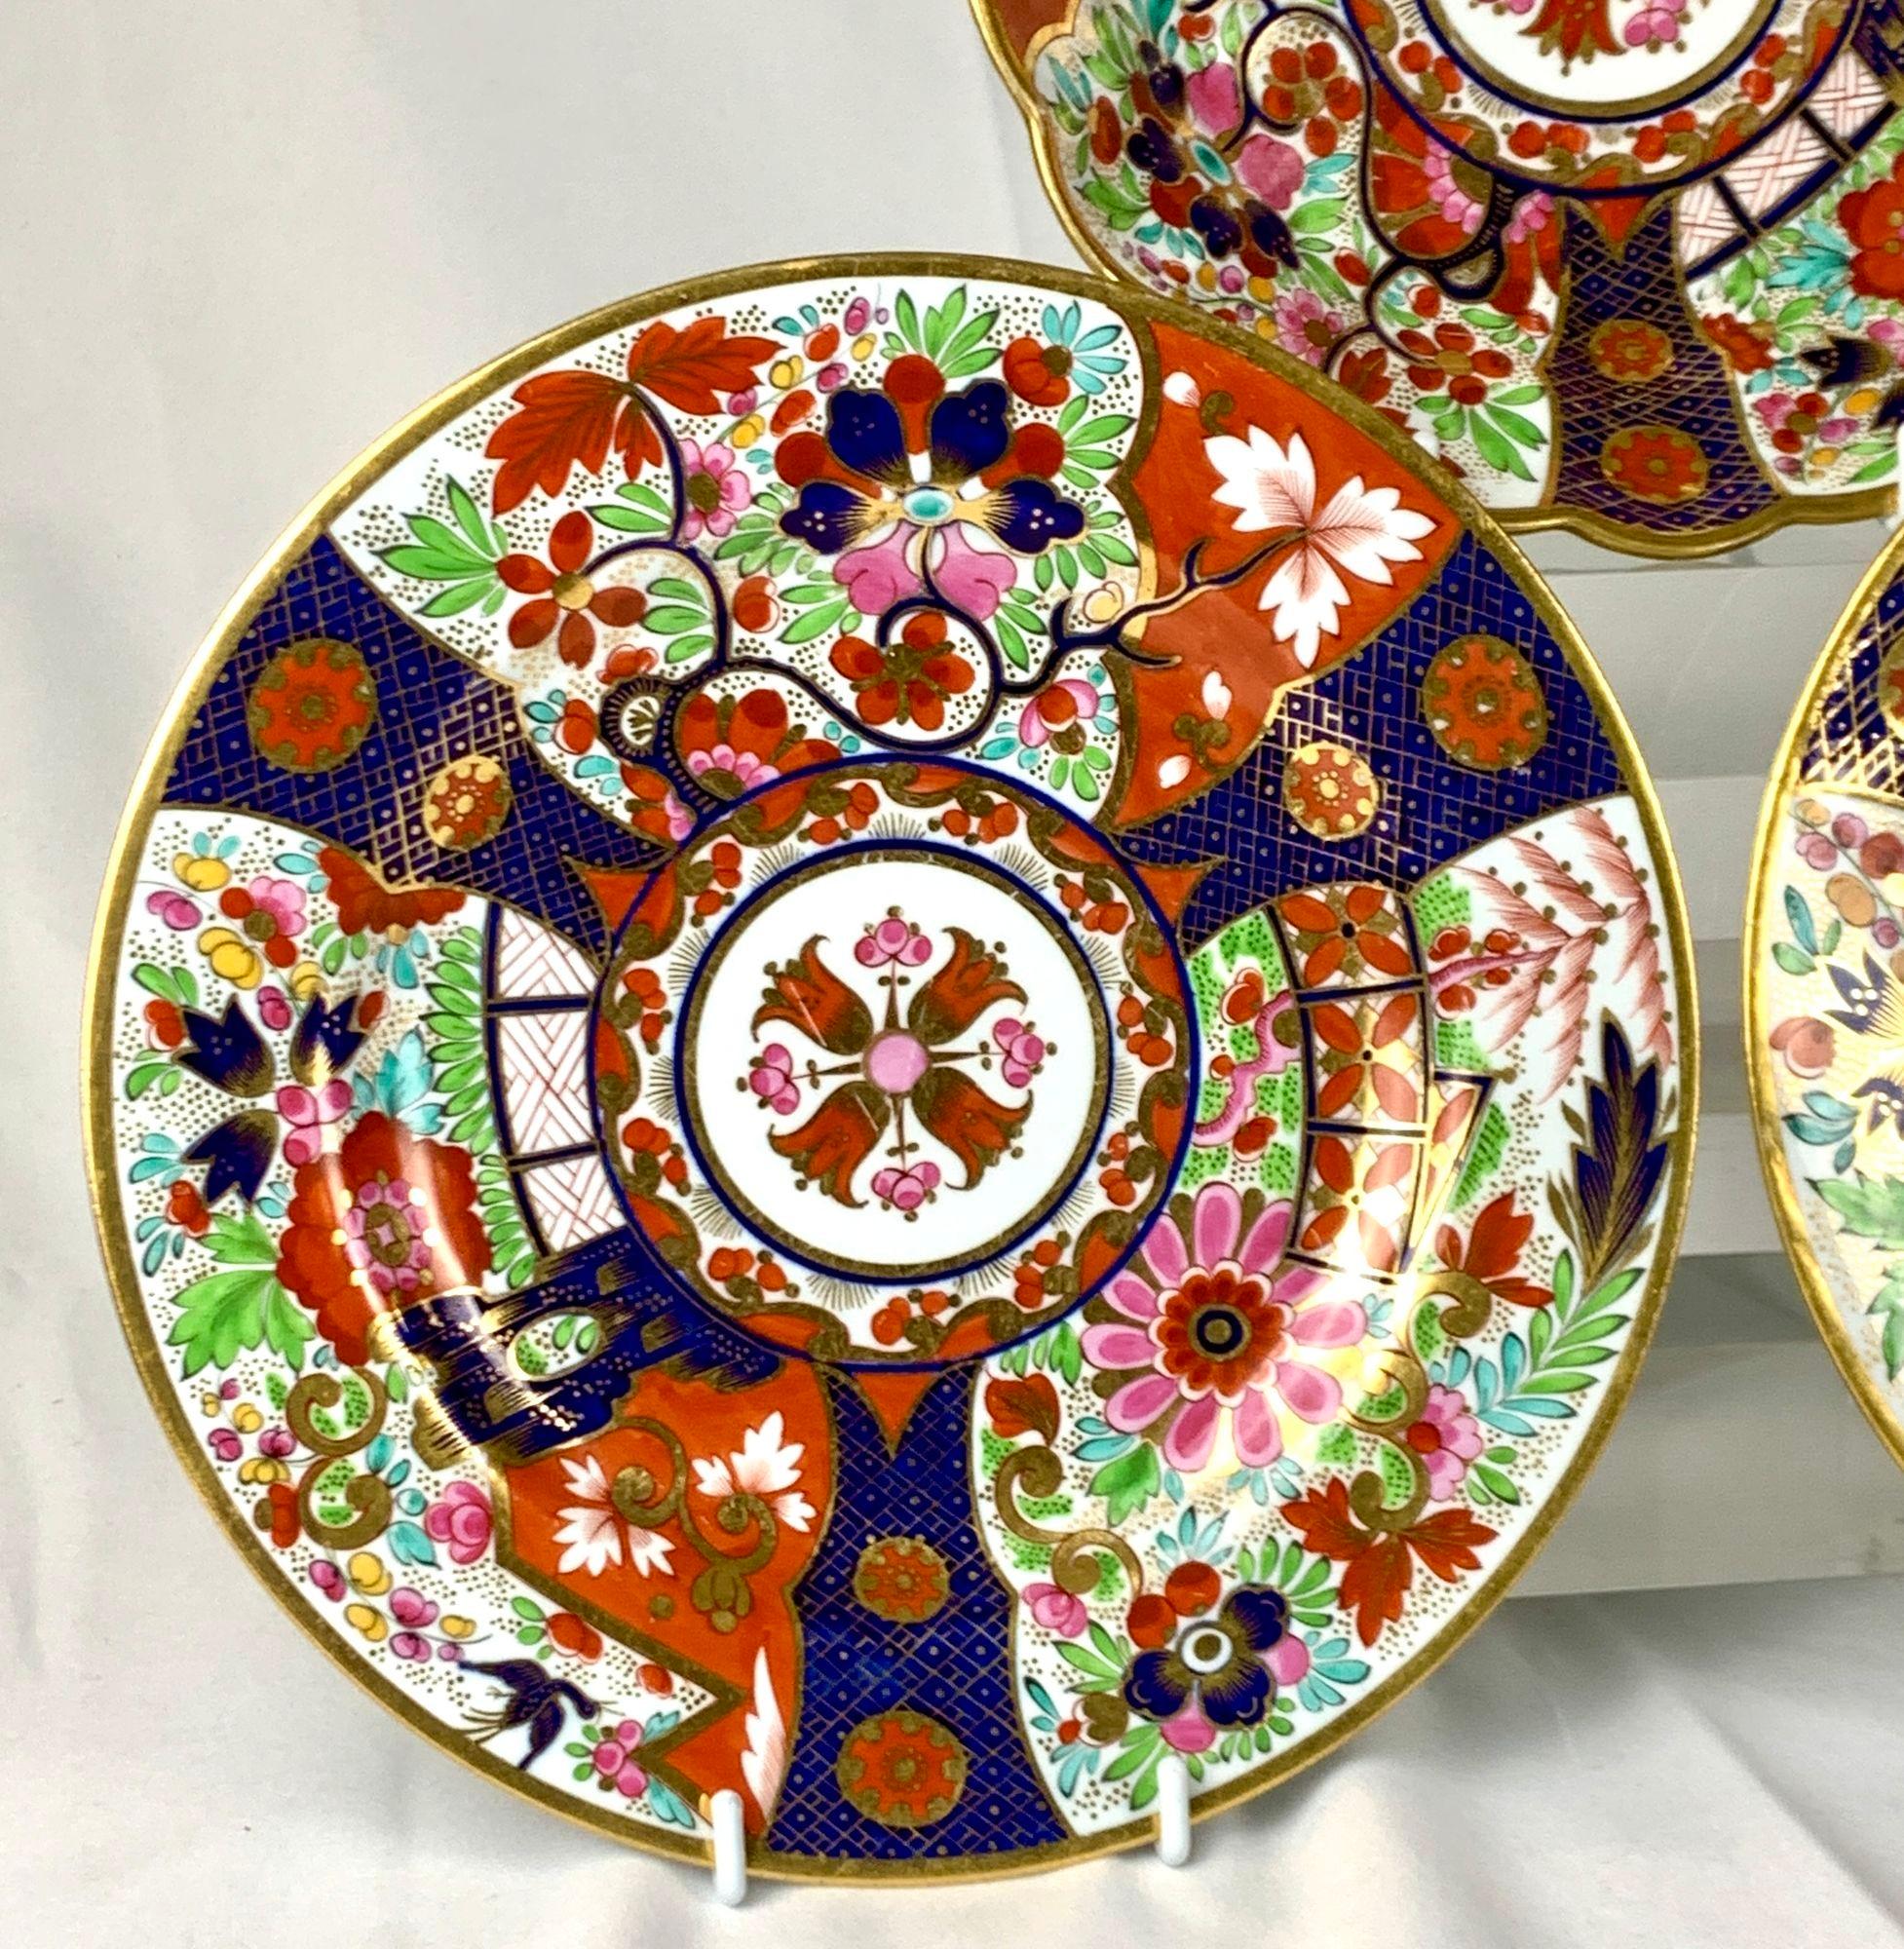 These three dishes were hand-painted circa 1800 in an Imari pattern created by Flight and Barr Worcester.
The design is exuberant, featuring large flowers, garden fences, rockwork, and a flying bird surrounding a central medallion.
The color